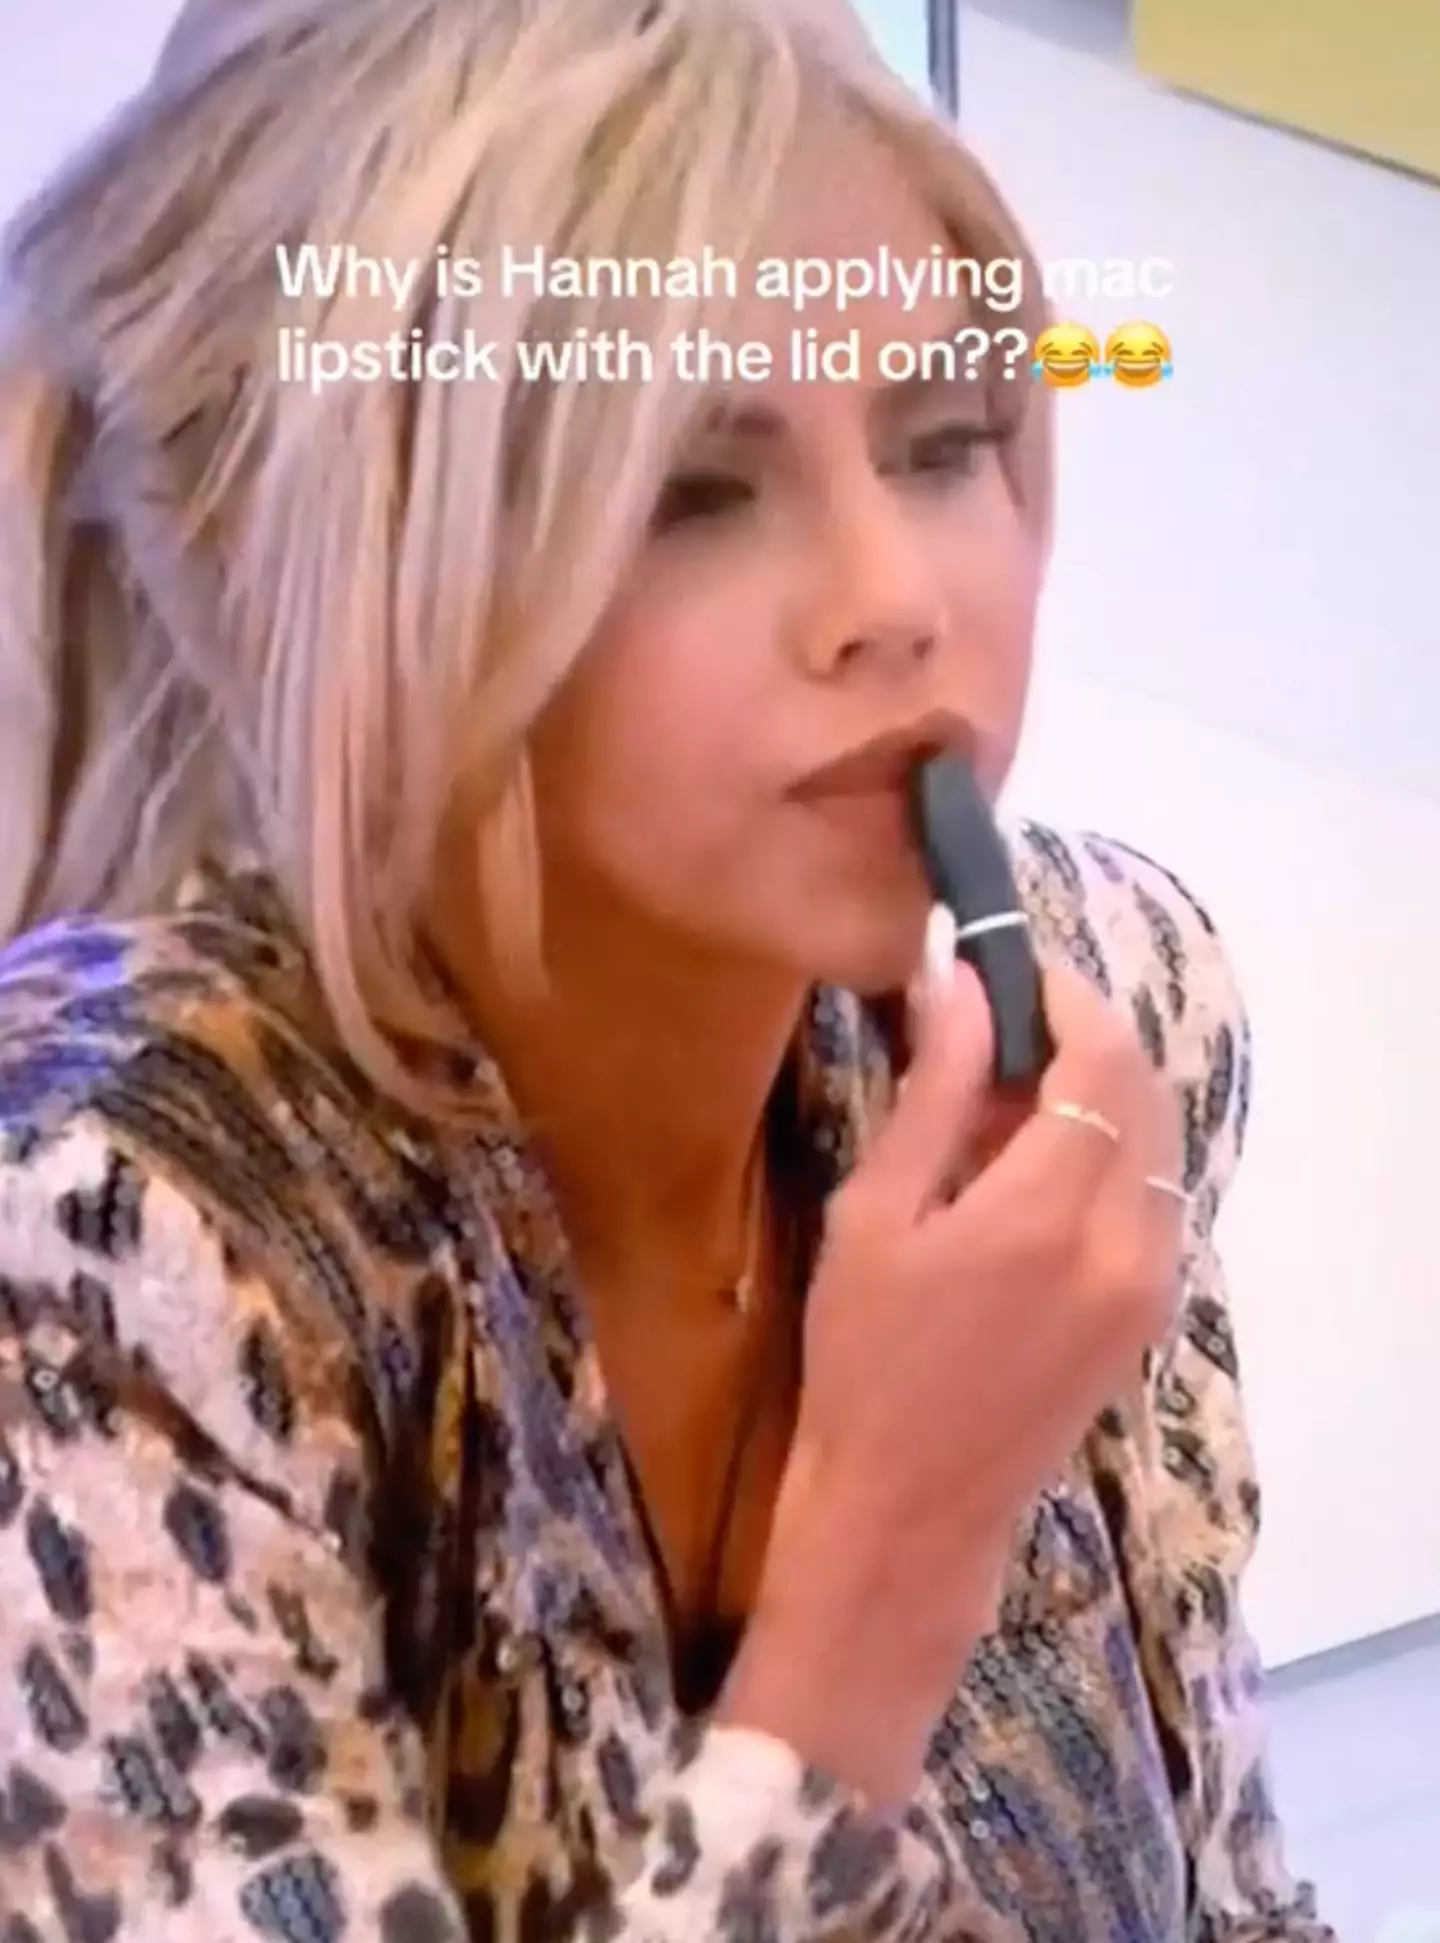 Viewers wondered whether Hannah was trying out a new beauty 'technique'.